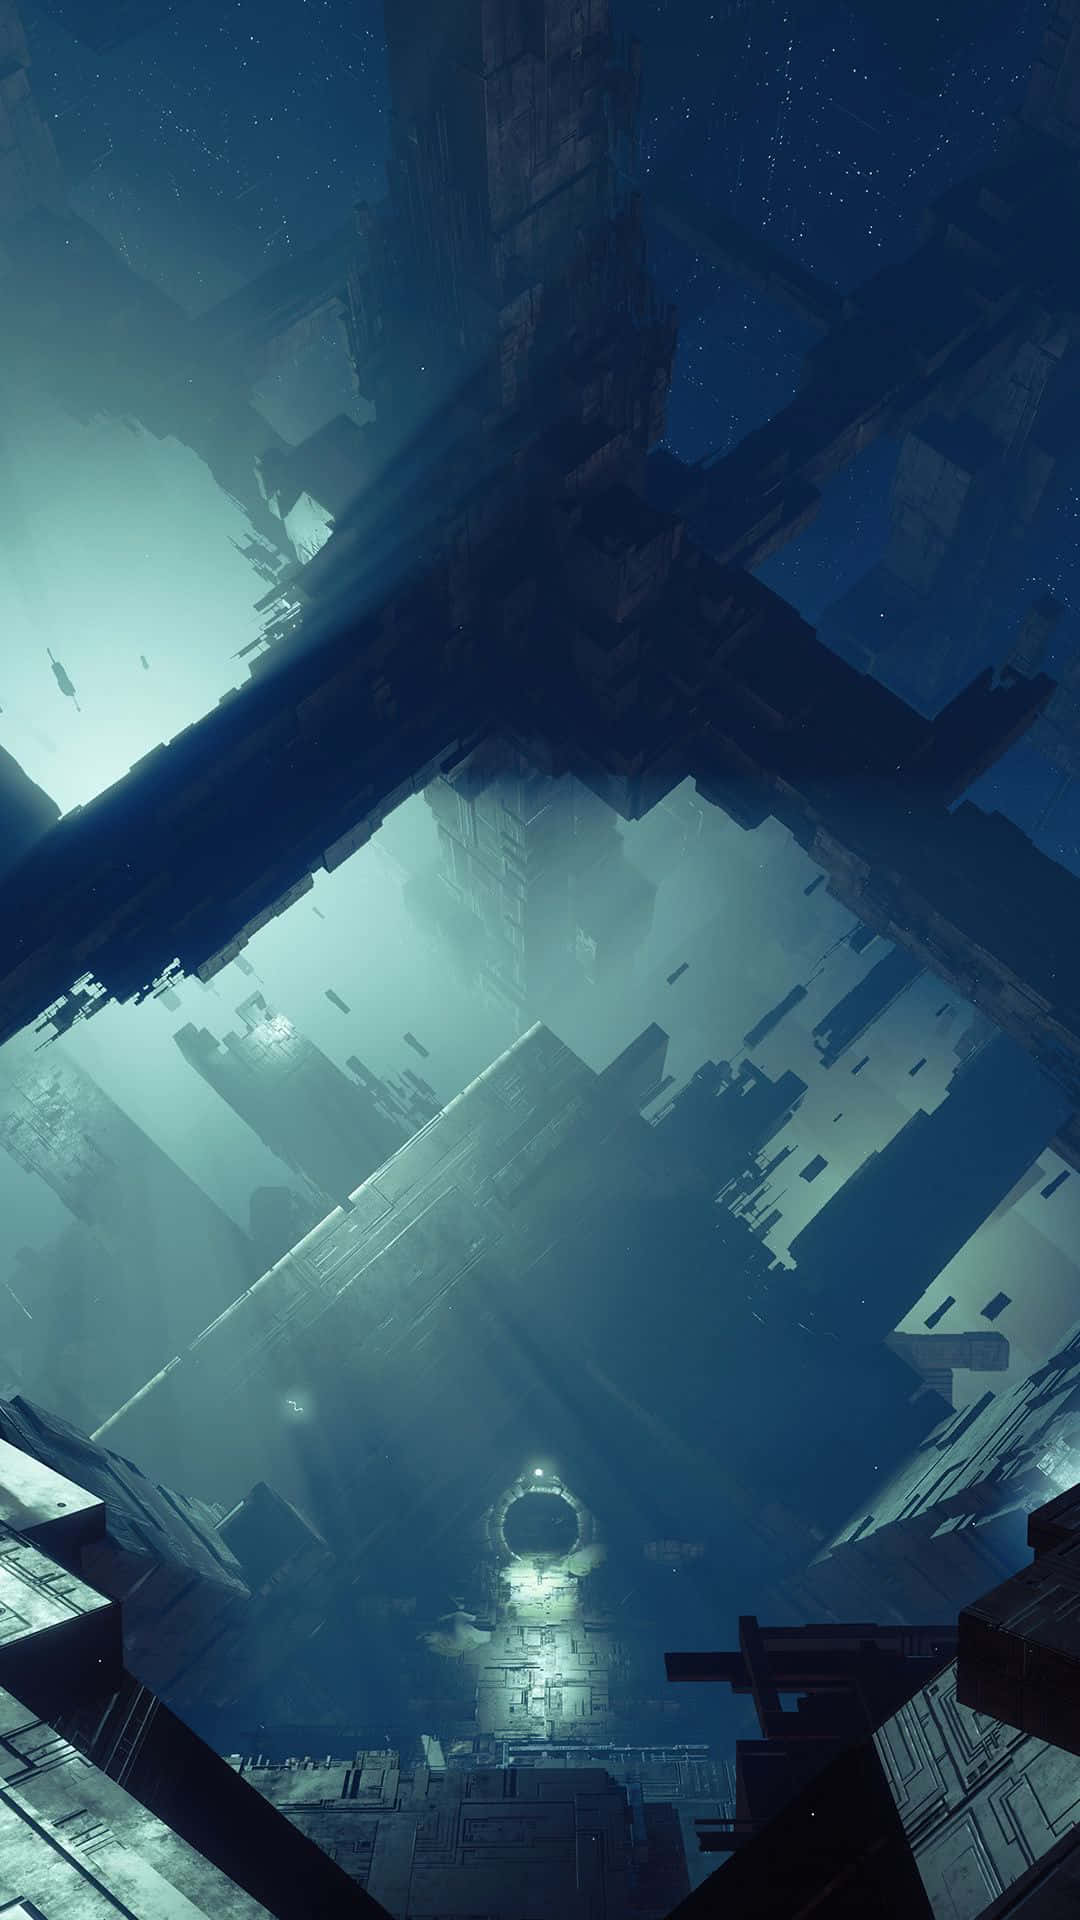 Get ready for an epic mobile journey with the iPhone Wallpaper